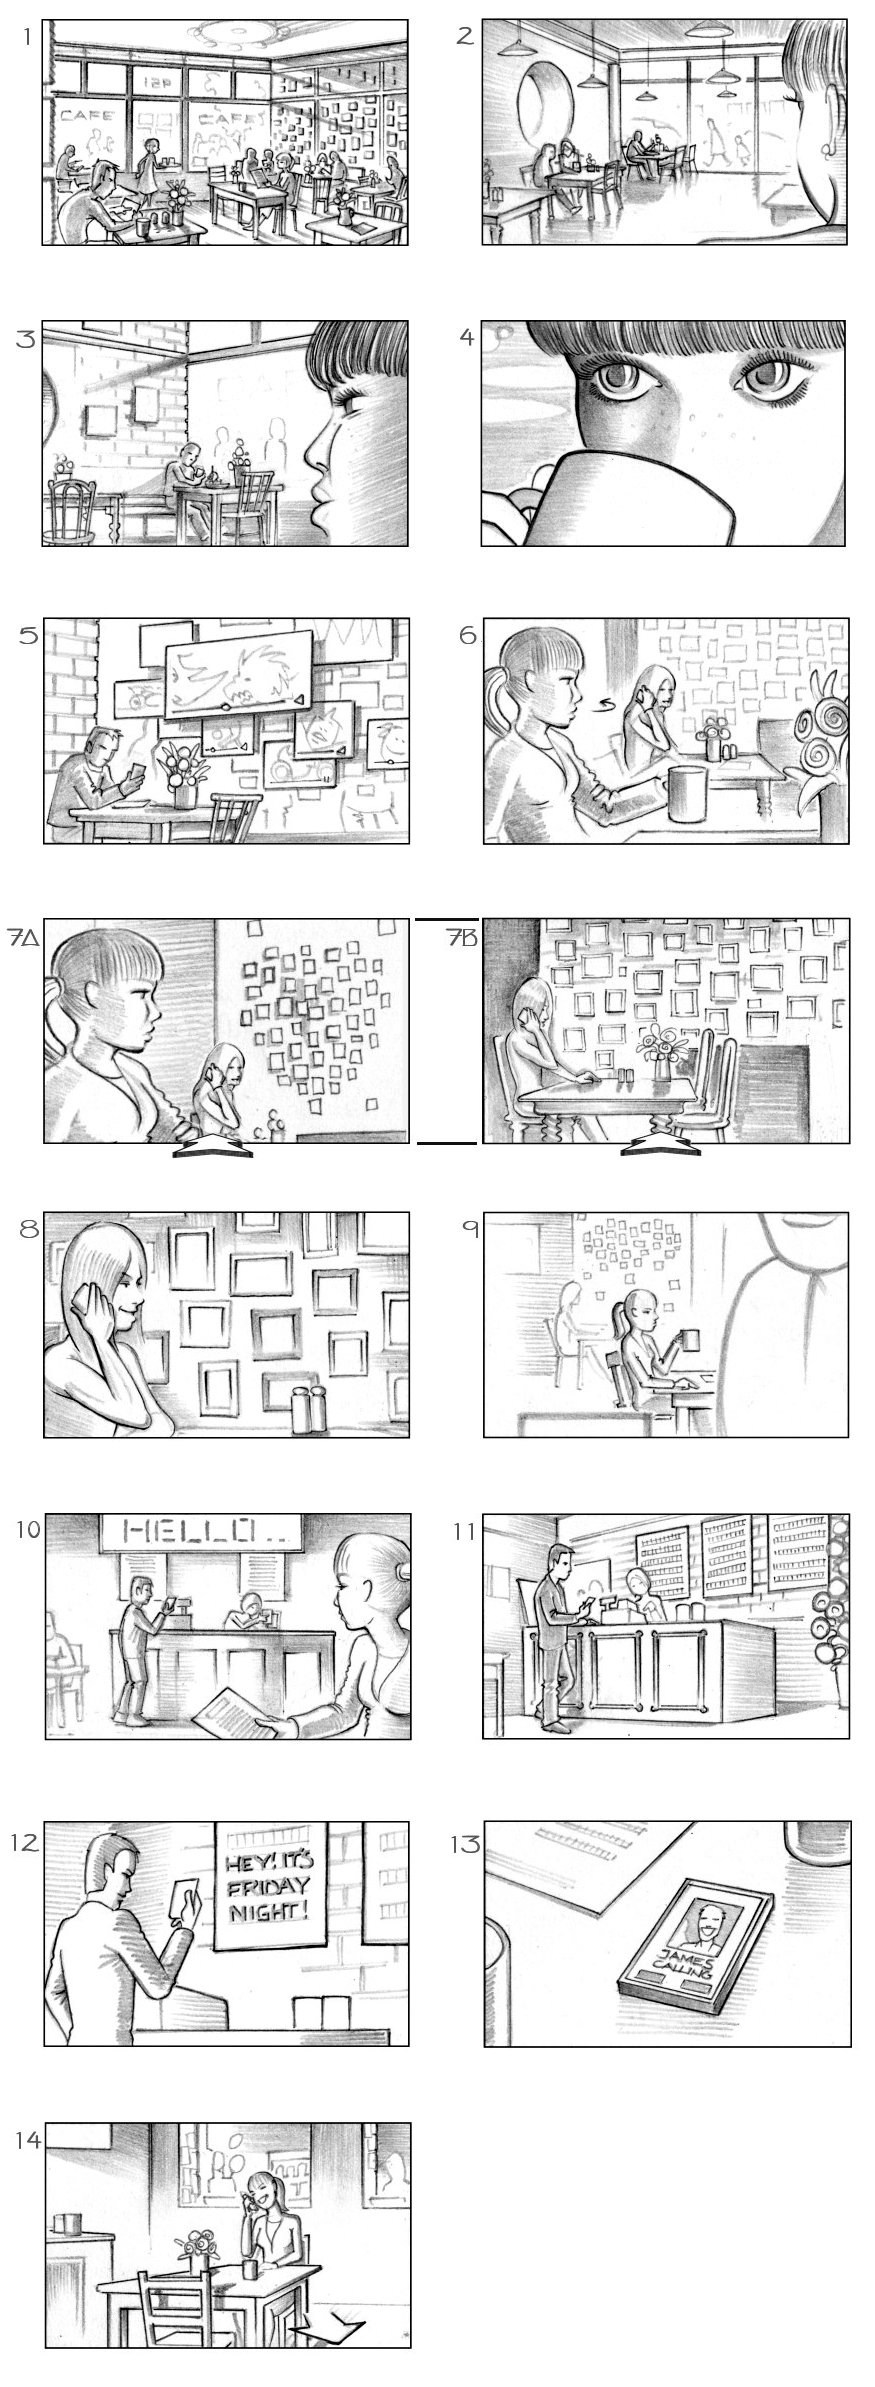 VODAFONE 'CAFE' STORYBOARD BY ANDY SPARROW